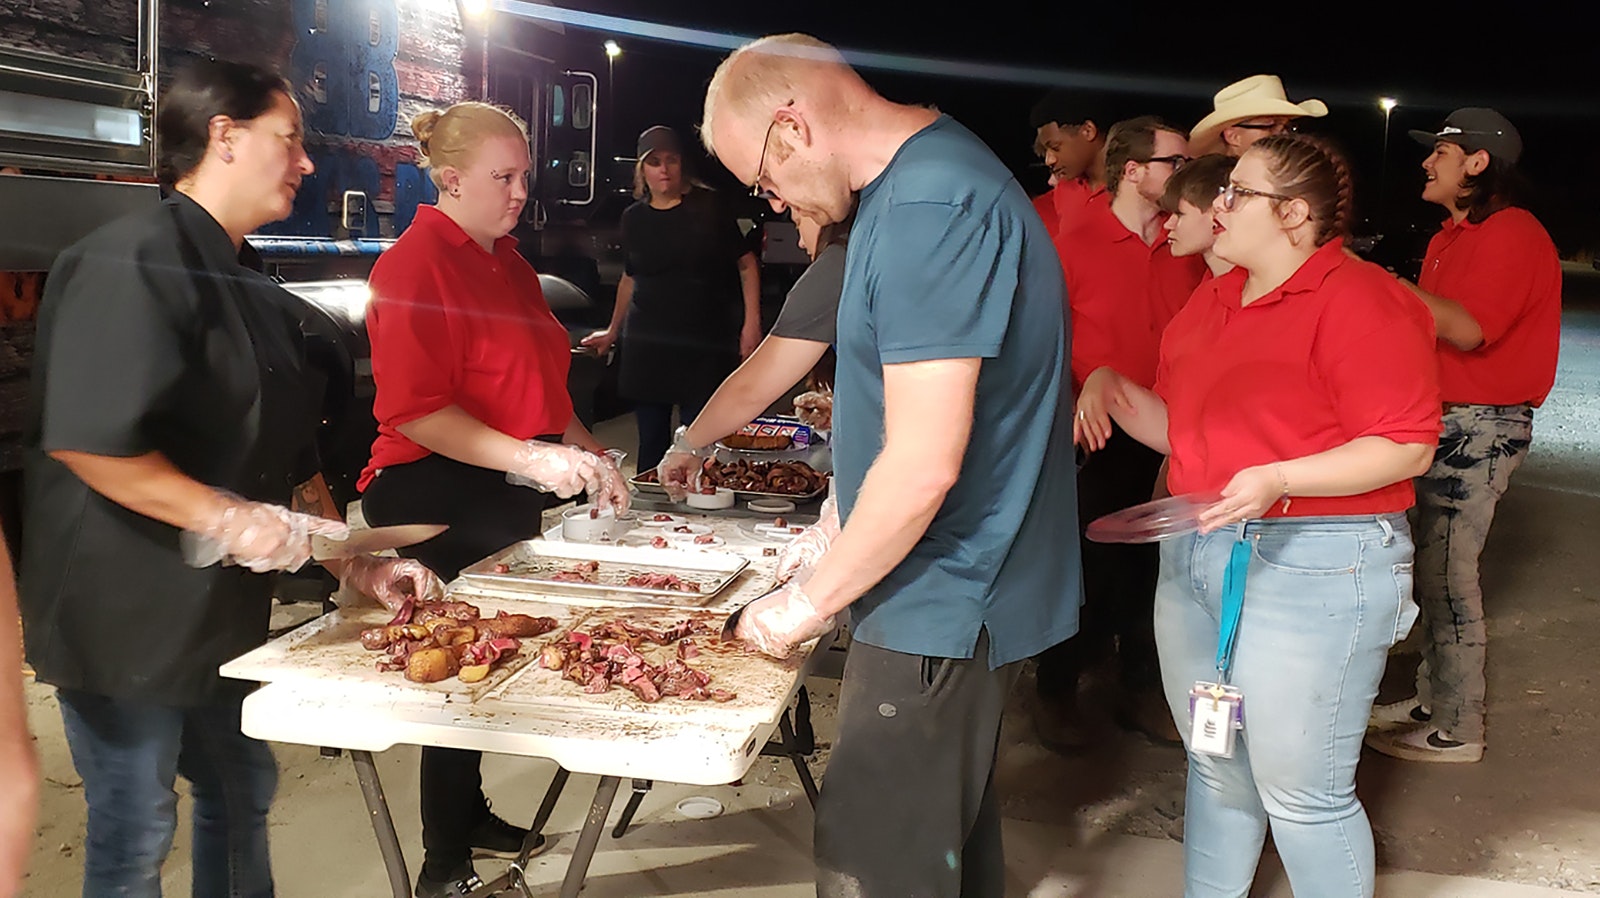 A small army of volunteers help cut up each numbered steak to serve to guests for the beef judging portion of the event.